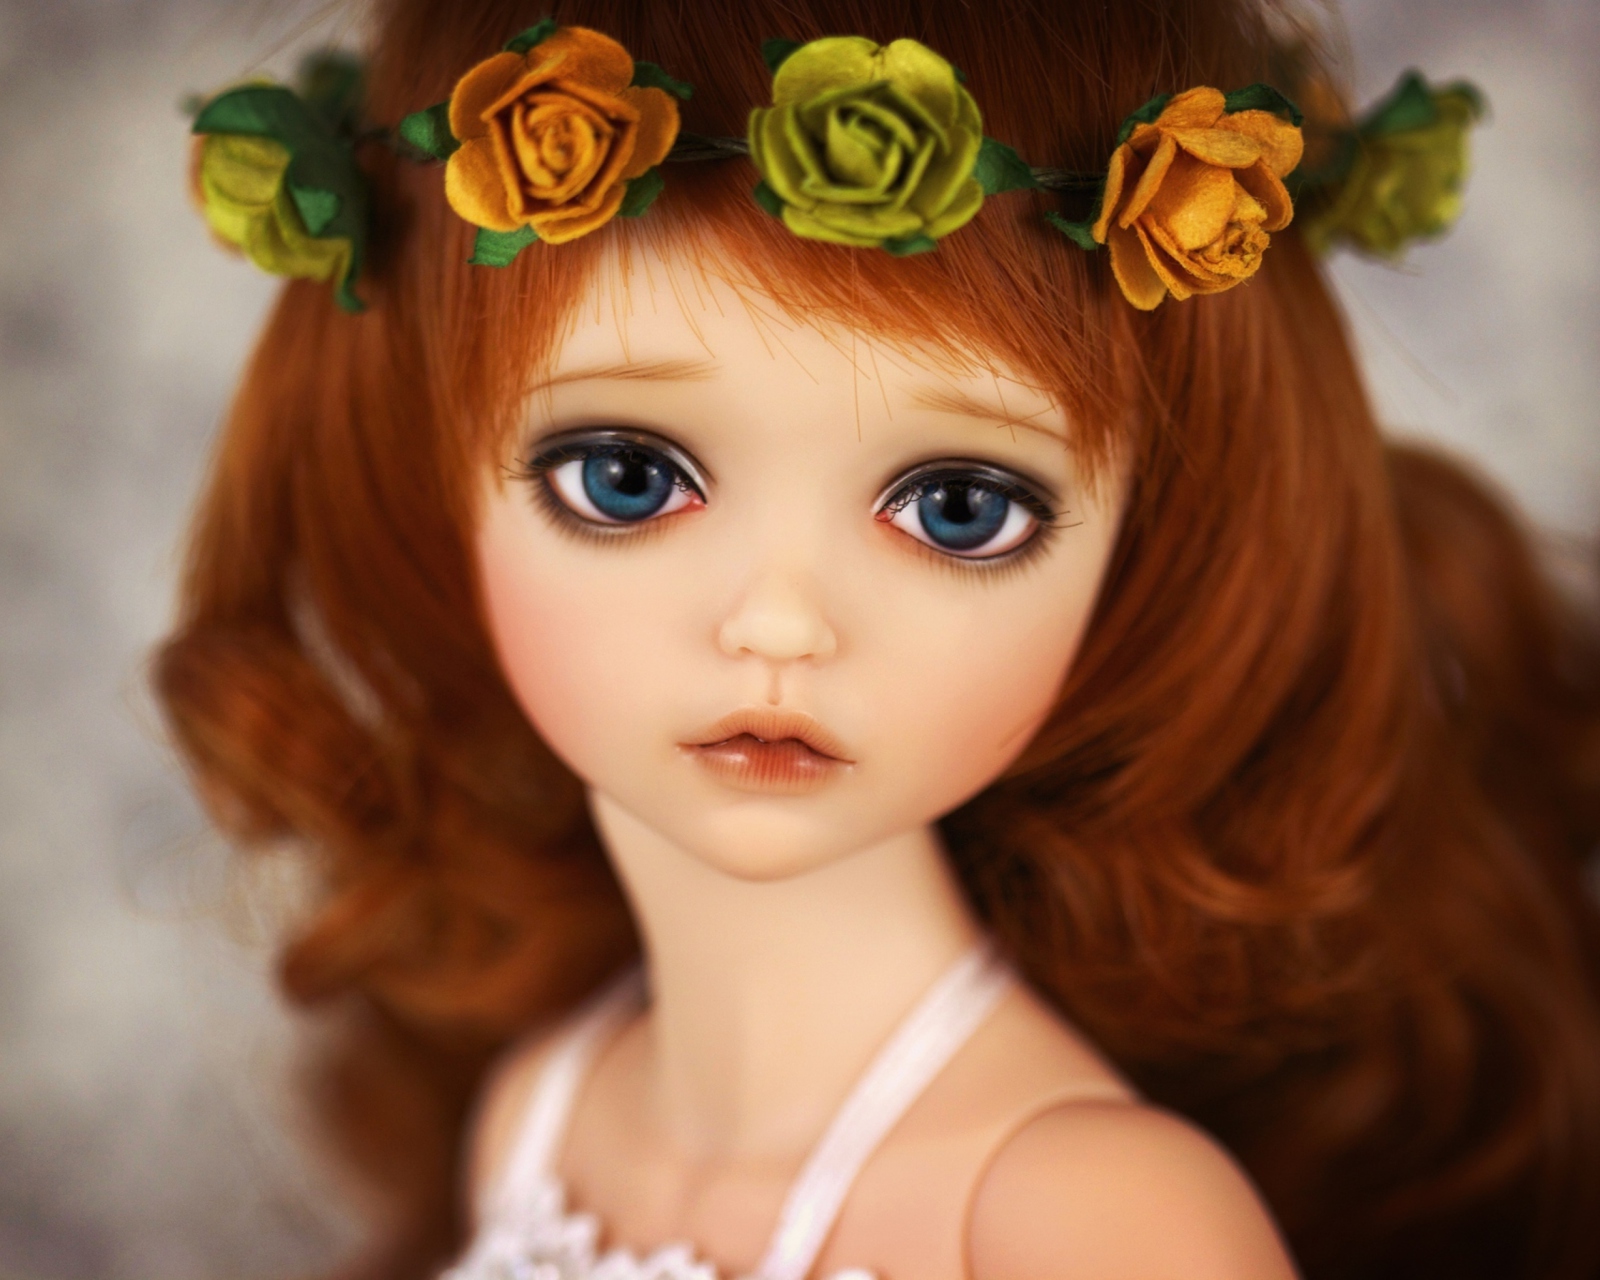 Redhead Doll With Flower Crown wallpaper 1600x1280